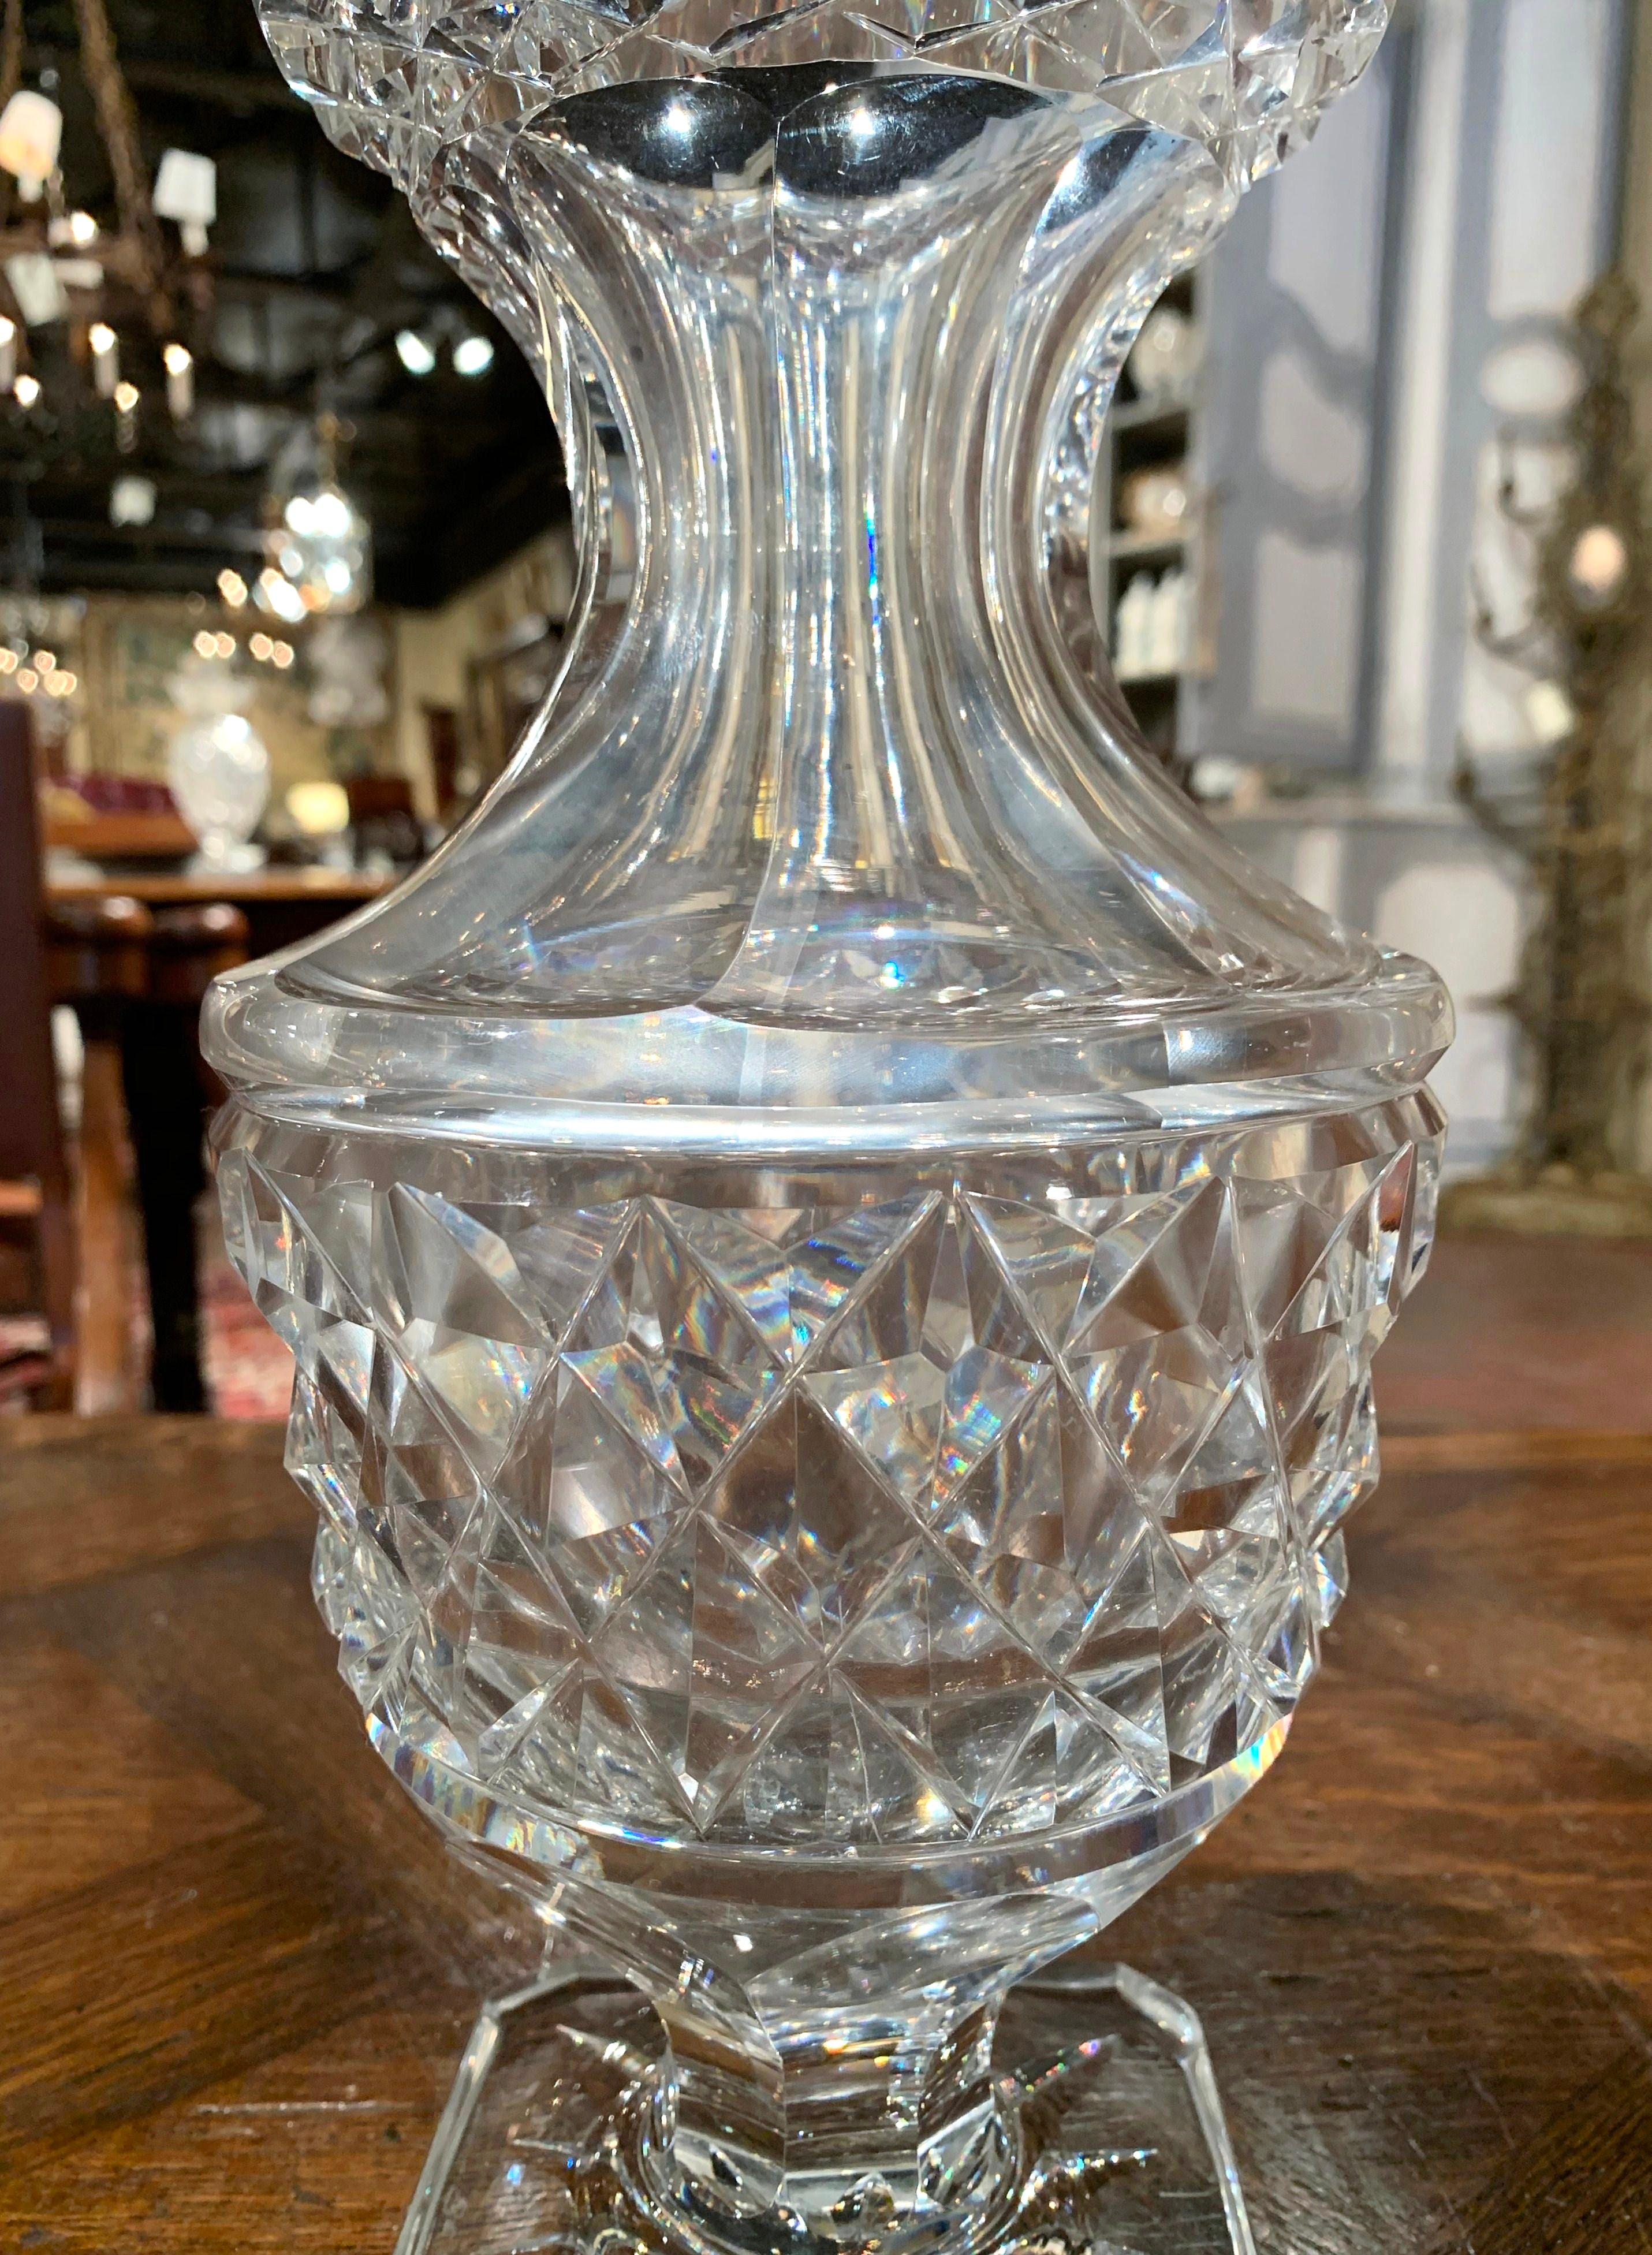 Decorate a console table or buffet with this elegant glass vase. Crafted in France circa 1970, the luxurious cut glass vessel stands on a square base, is shaped as a neoclassical urn with a wide mouth at the top, and is decorated throughout with